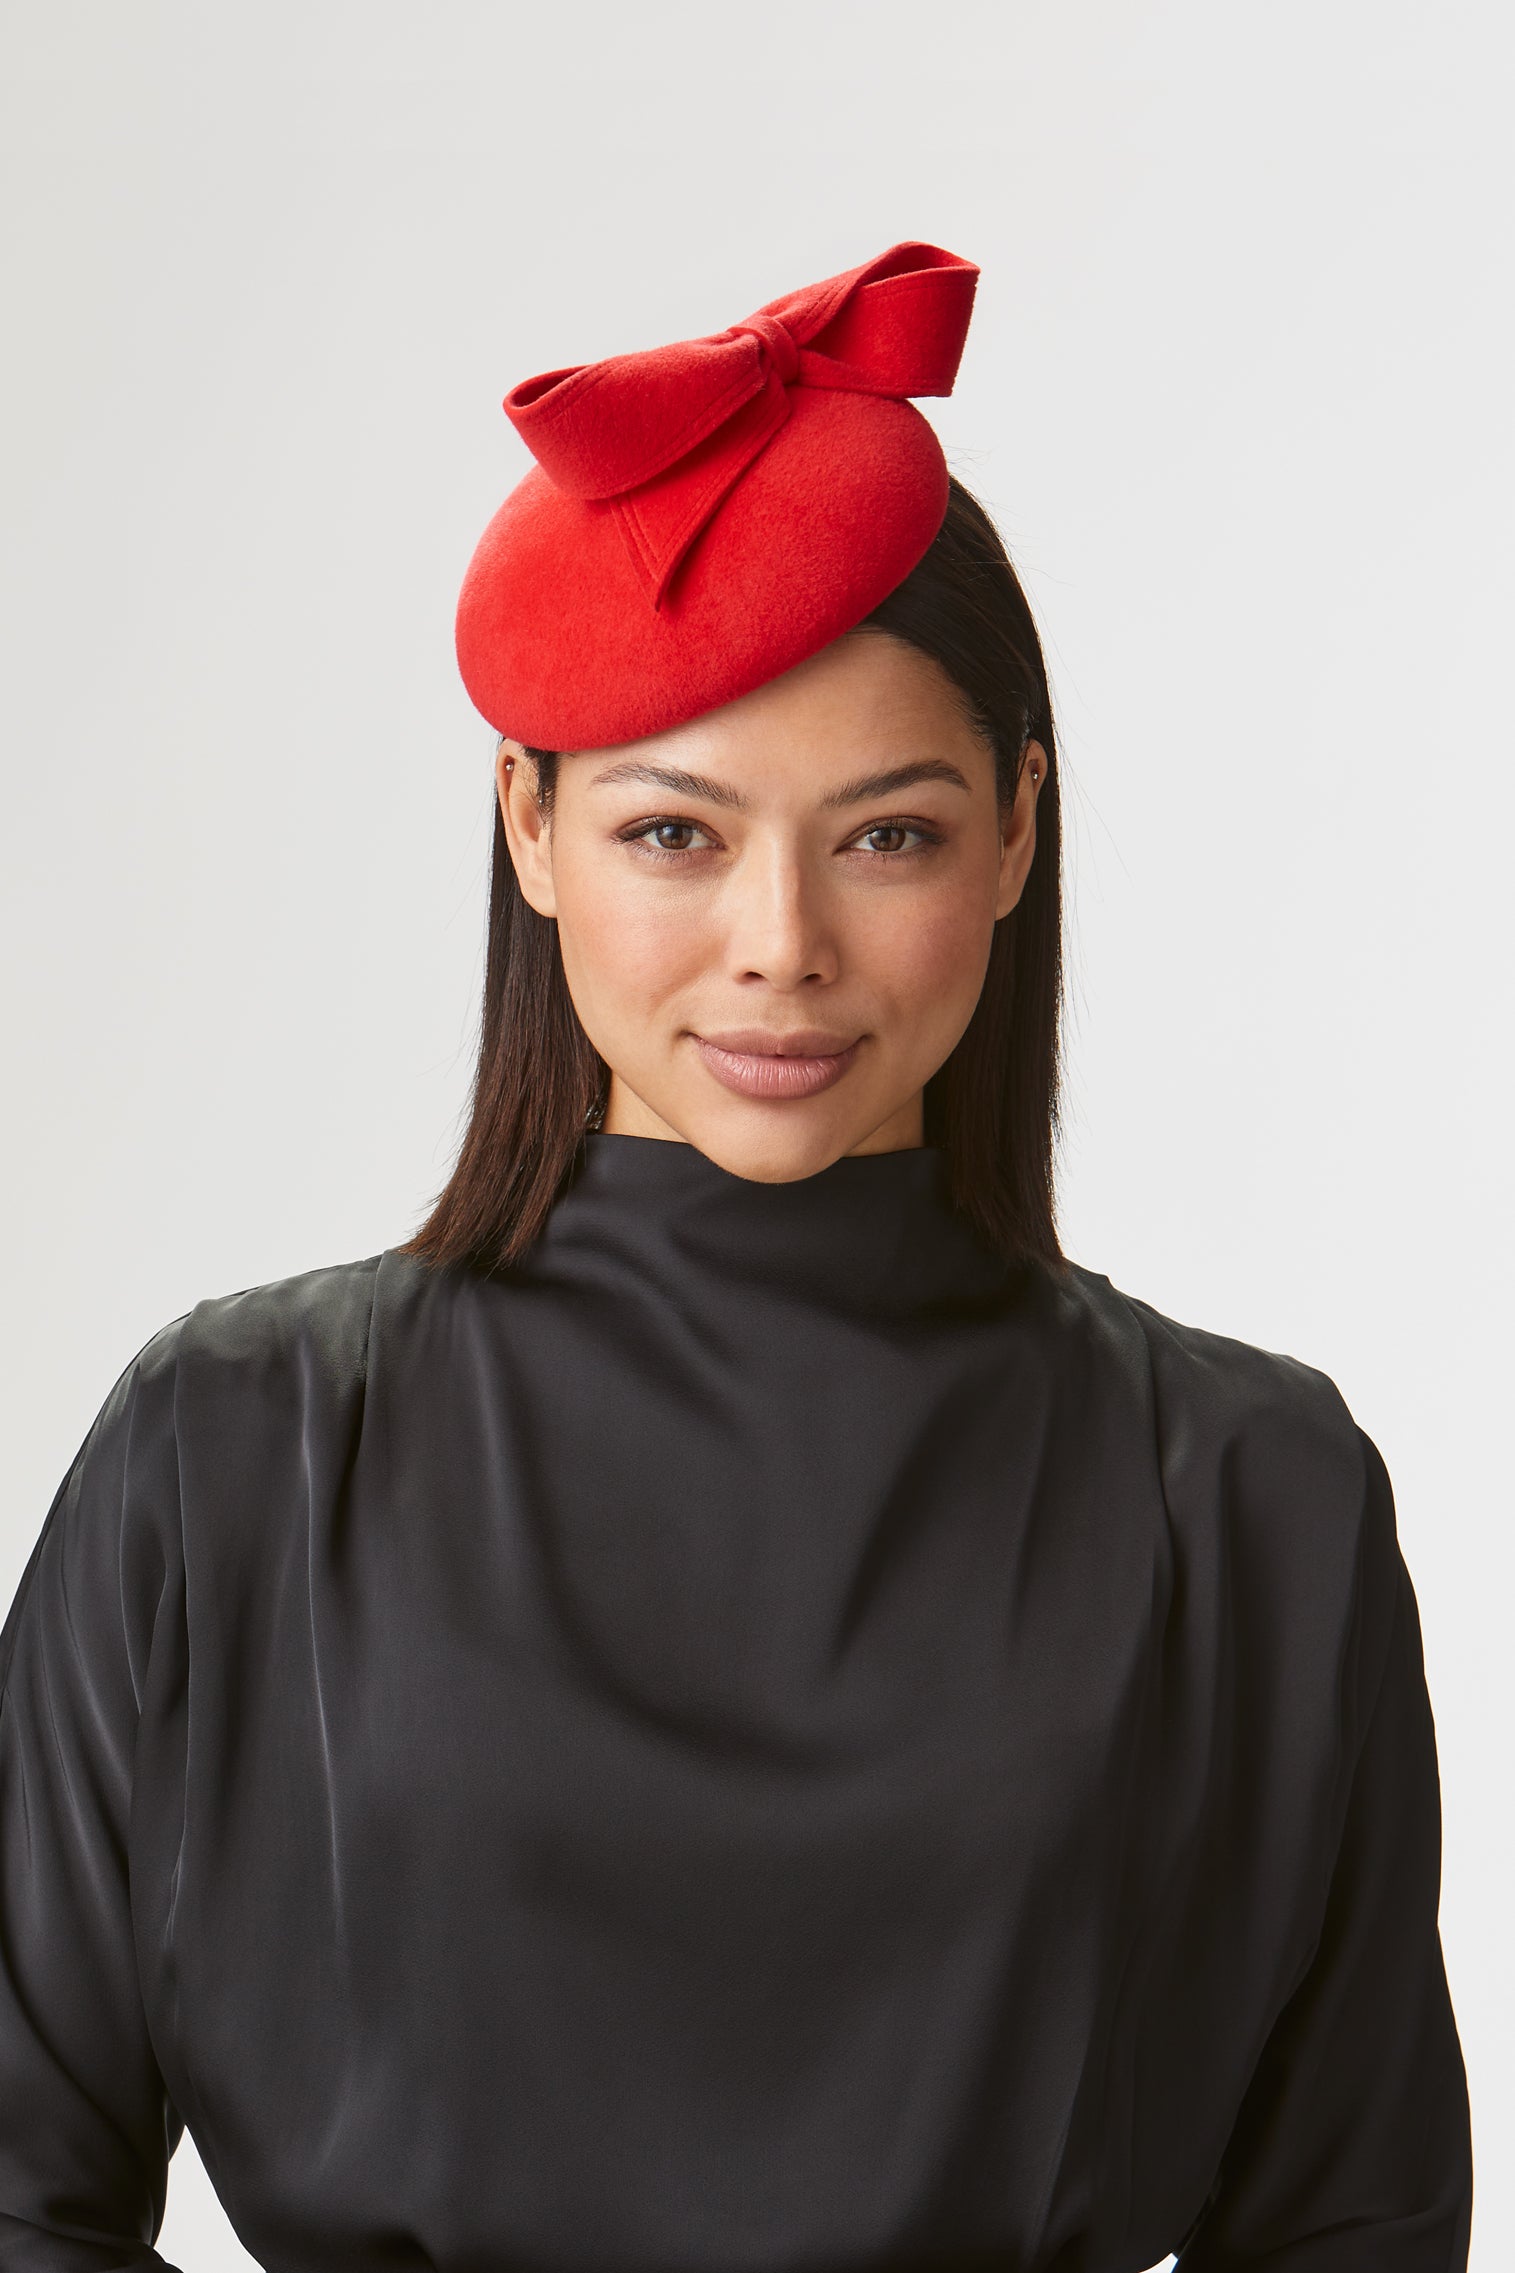 Lana Red Button Hat - Lock Couture by Awon Golding - Lock & Co. Hatters London UK